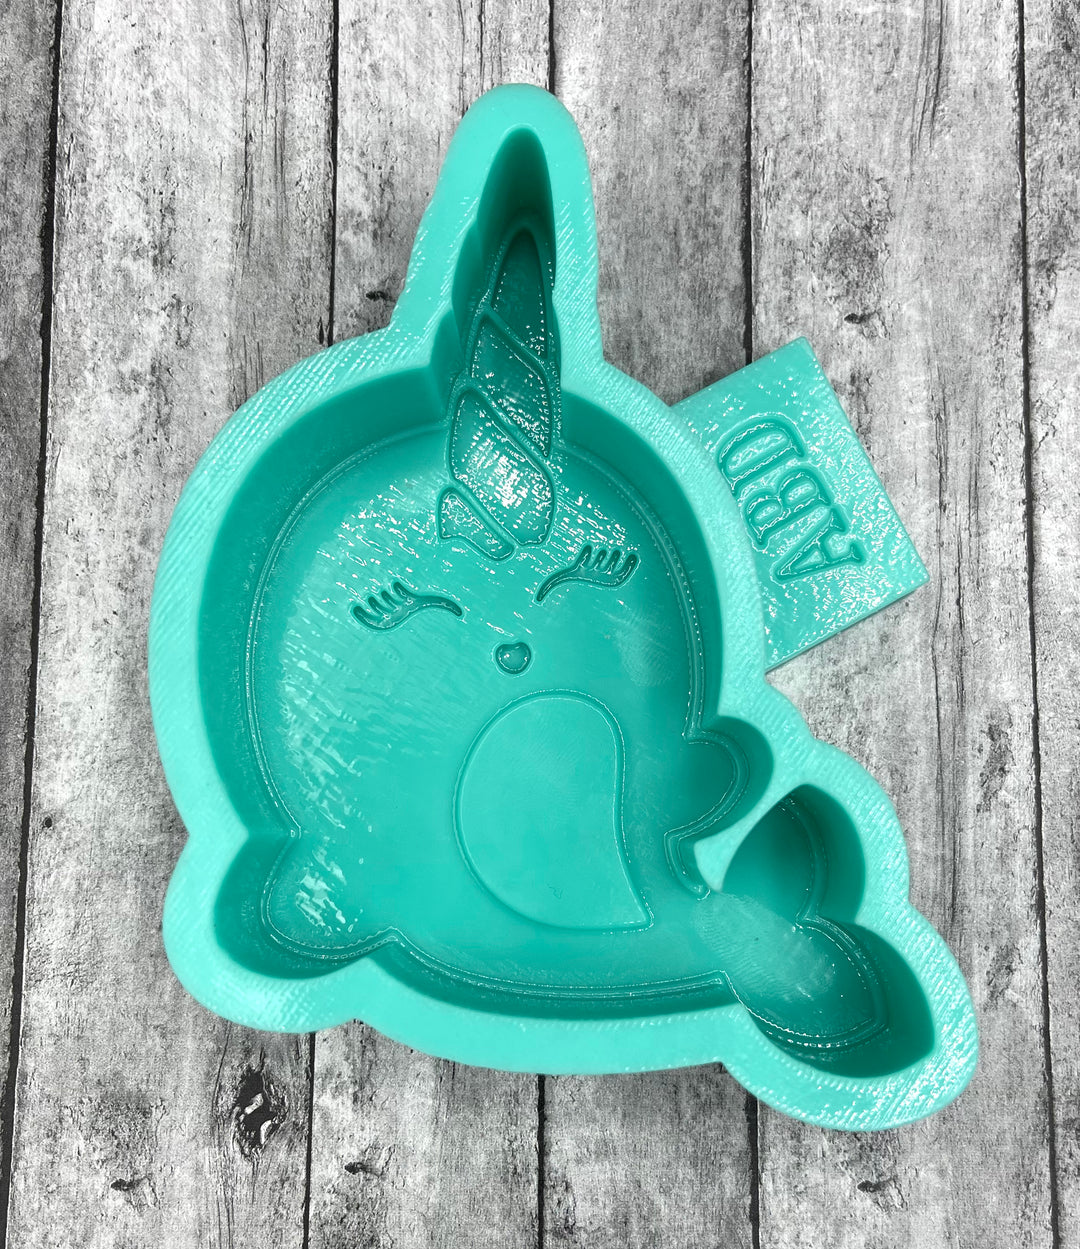 Narwhal Freshie Silicone Mold